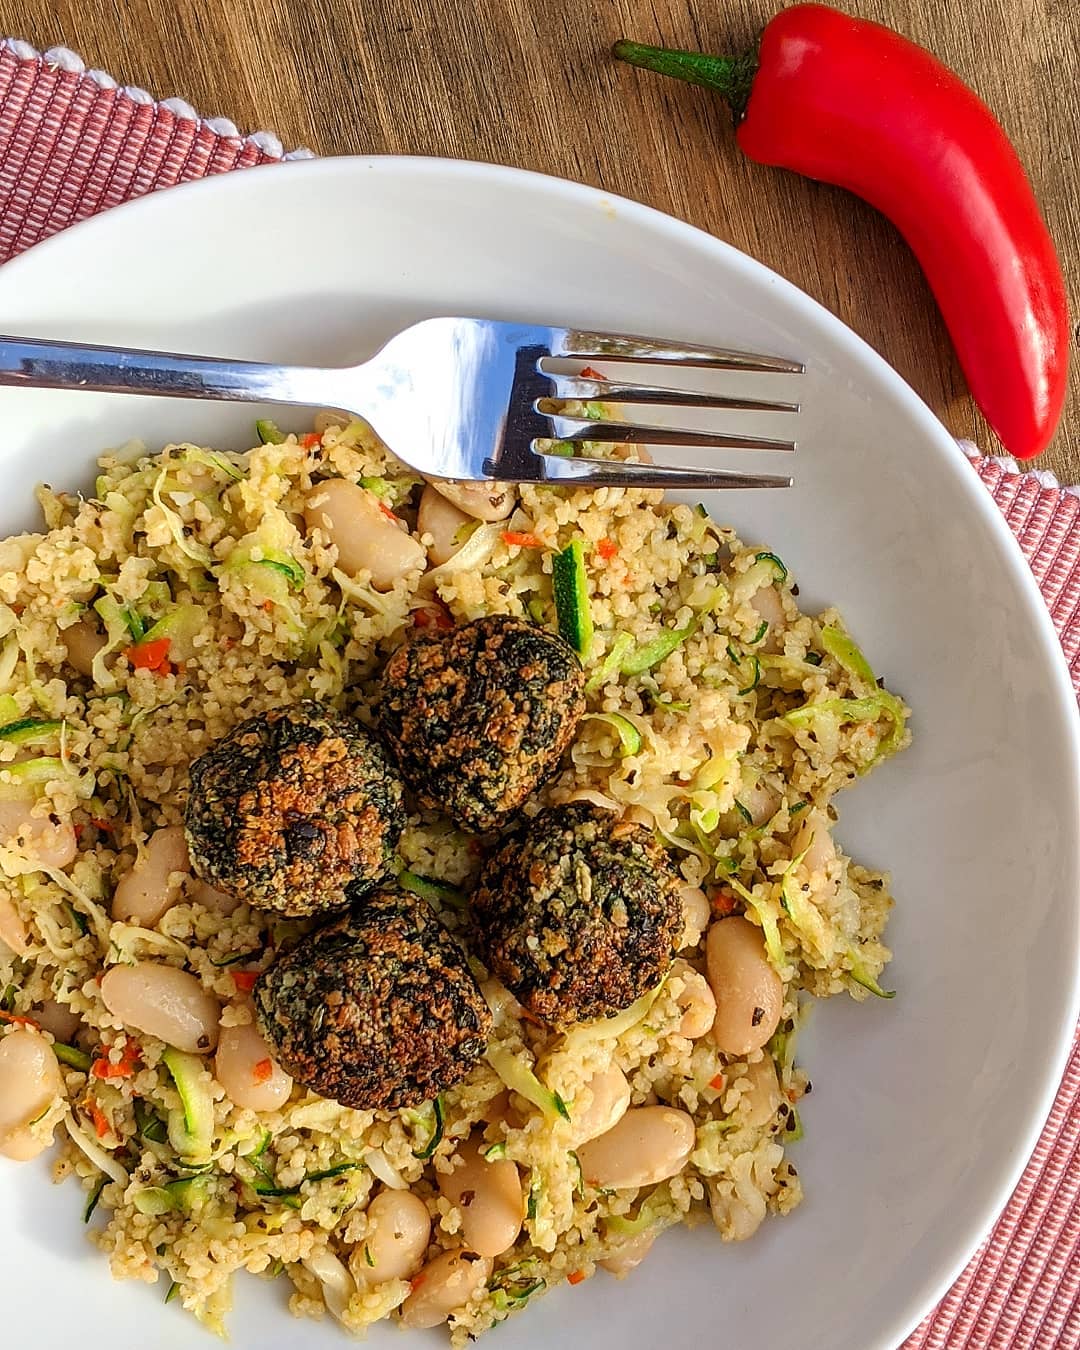 Garlic Spinach Balls with Wholewheat Couscous